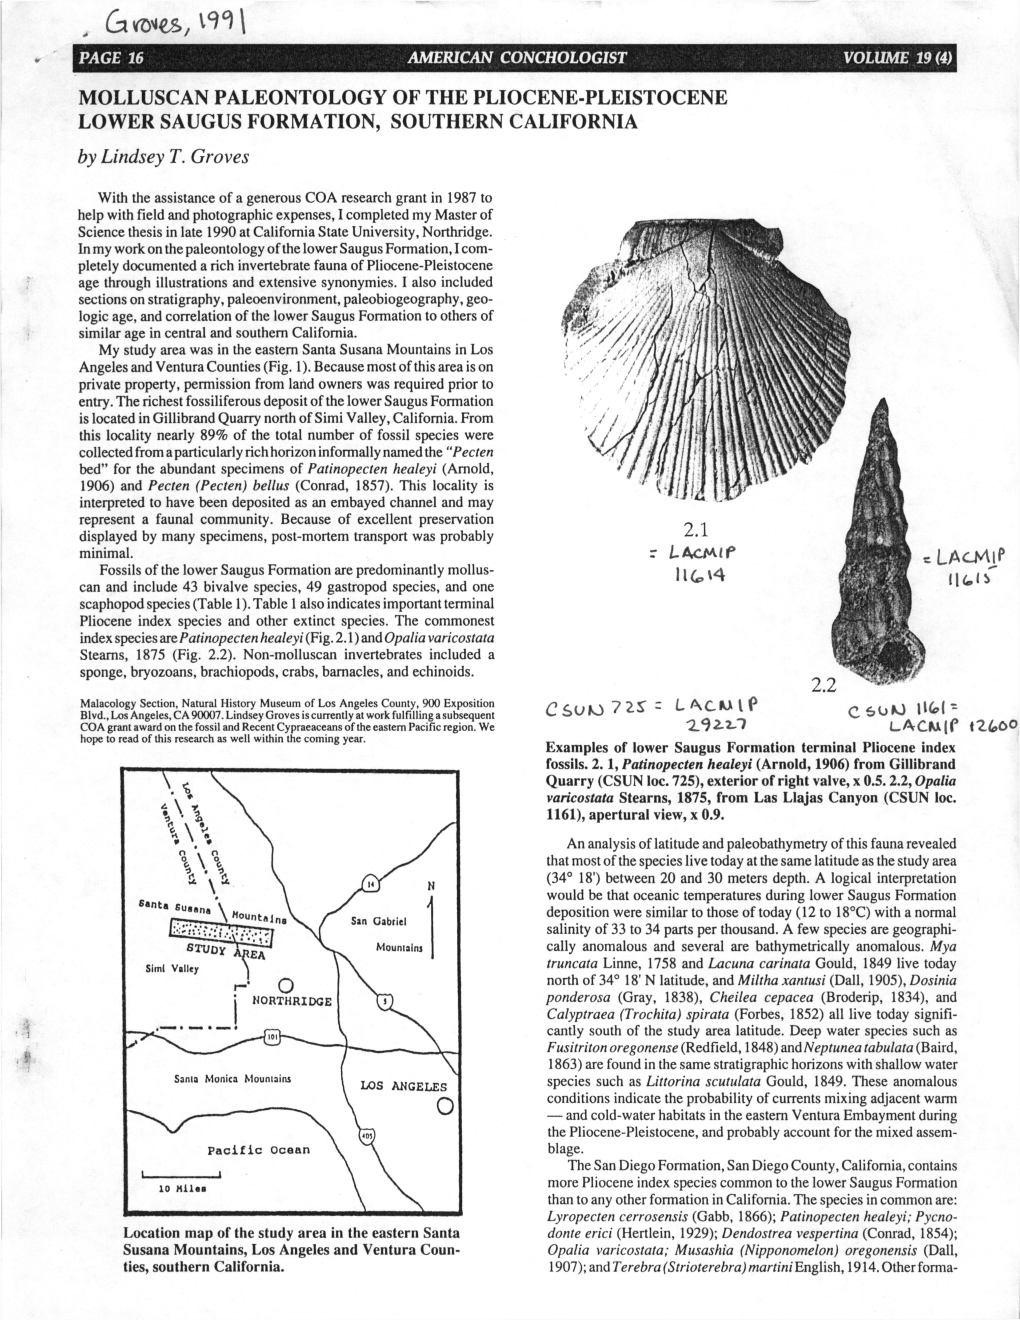 MOLLUSCAN PALEONTOLOGY of the PLIOCENE-PLEISTOCENE LOWER SAUGUS FORMATION, SOUTHERN CALIFORNIA by Lindsey T